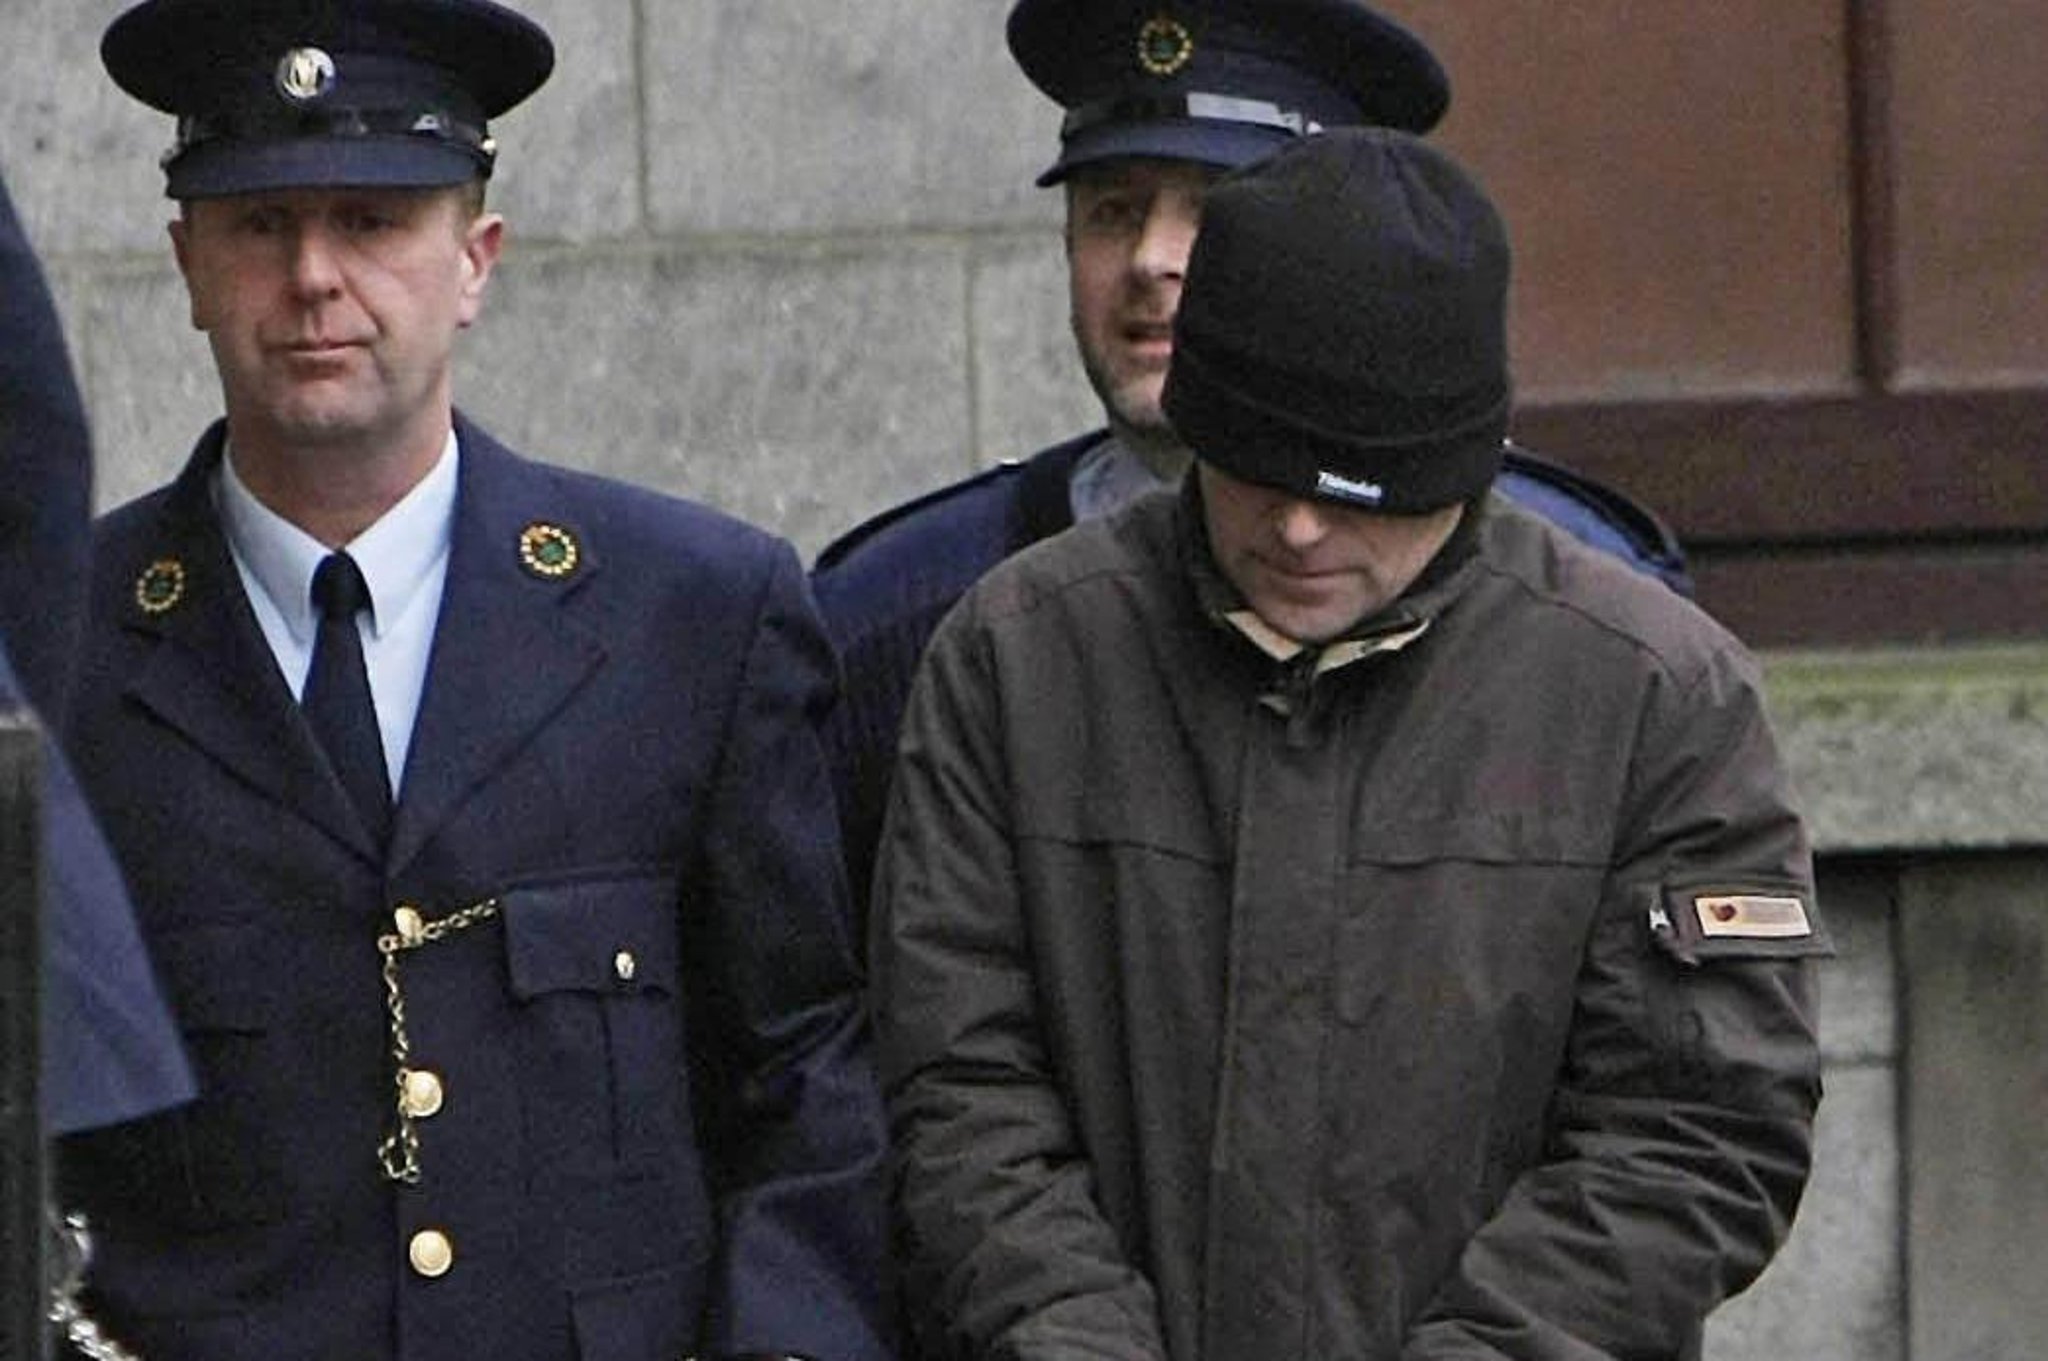 Ruth Dudley Edwards: Thank you Lithuania for pursuing Omagh bomber